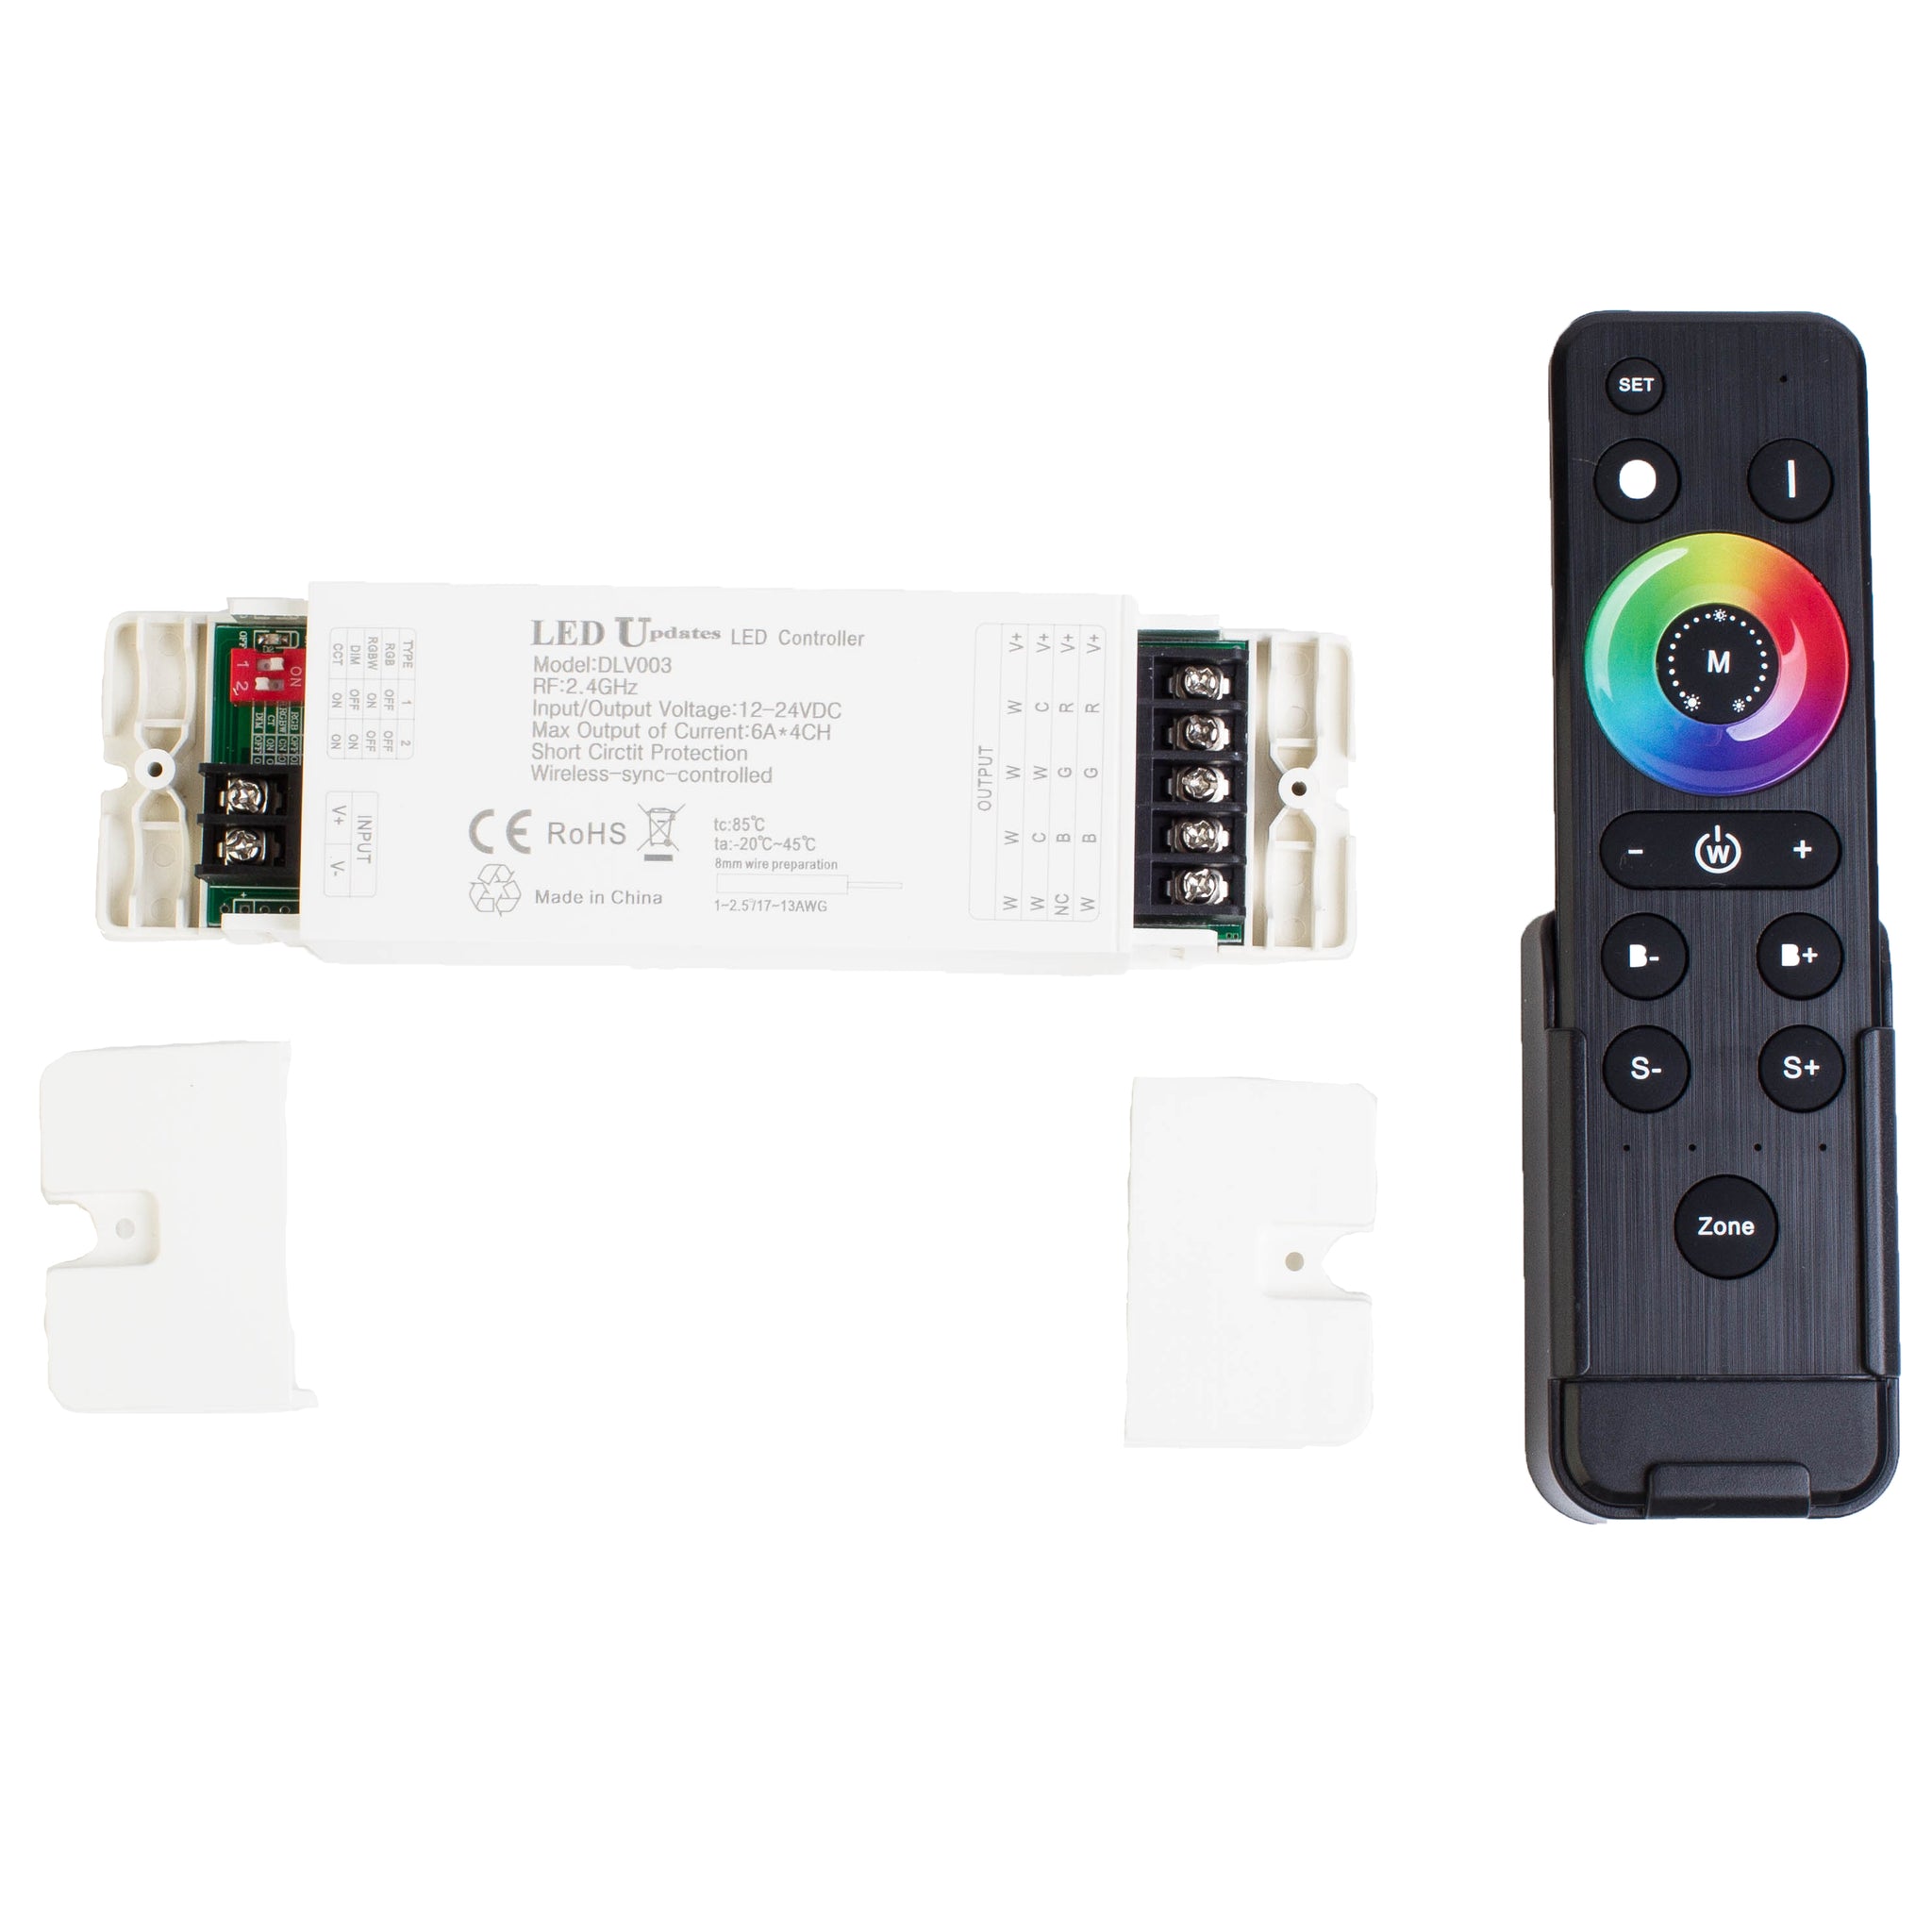 Universal Remote for LED String Lights, Multifunction Wireless